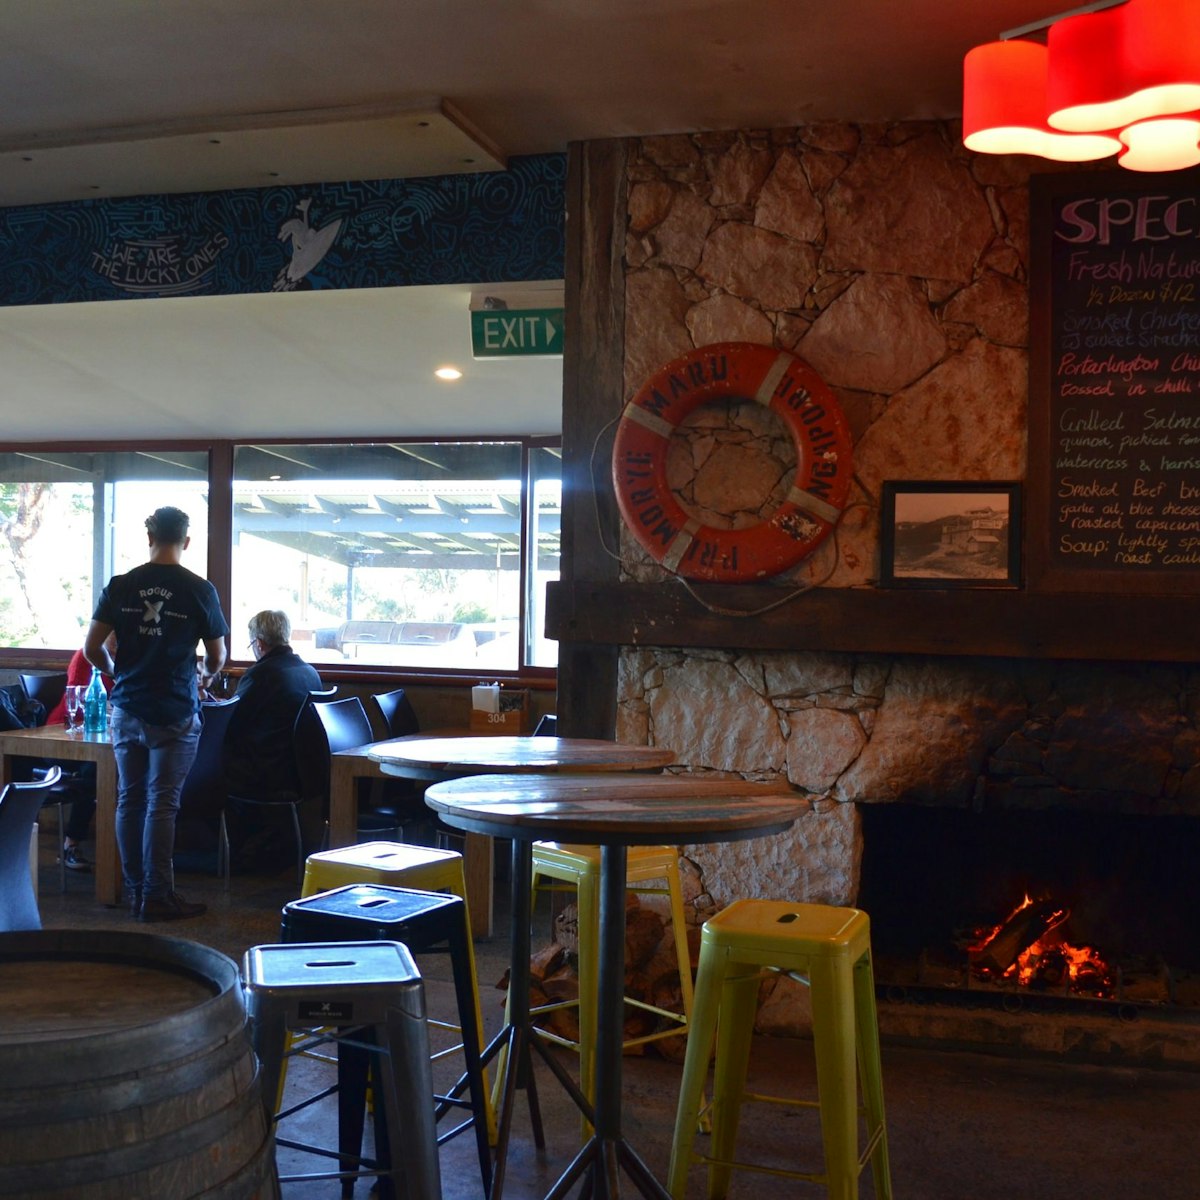 Inside the Aireys Pub with fireplace.